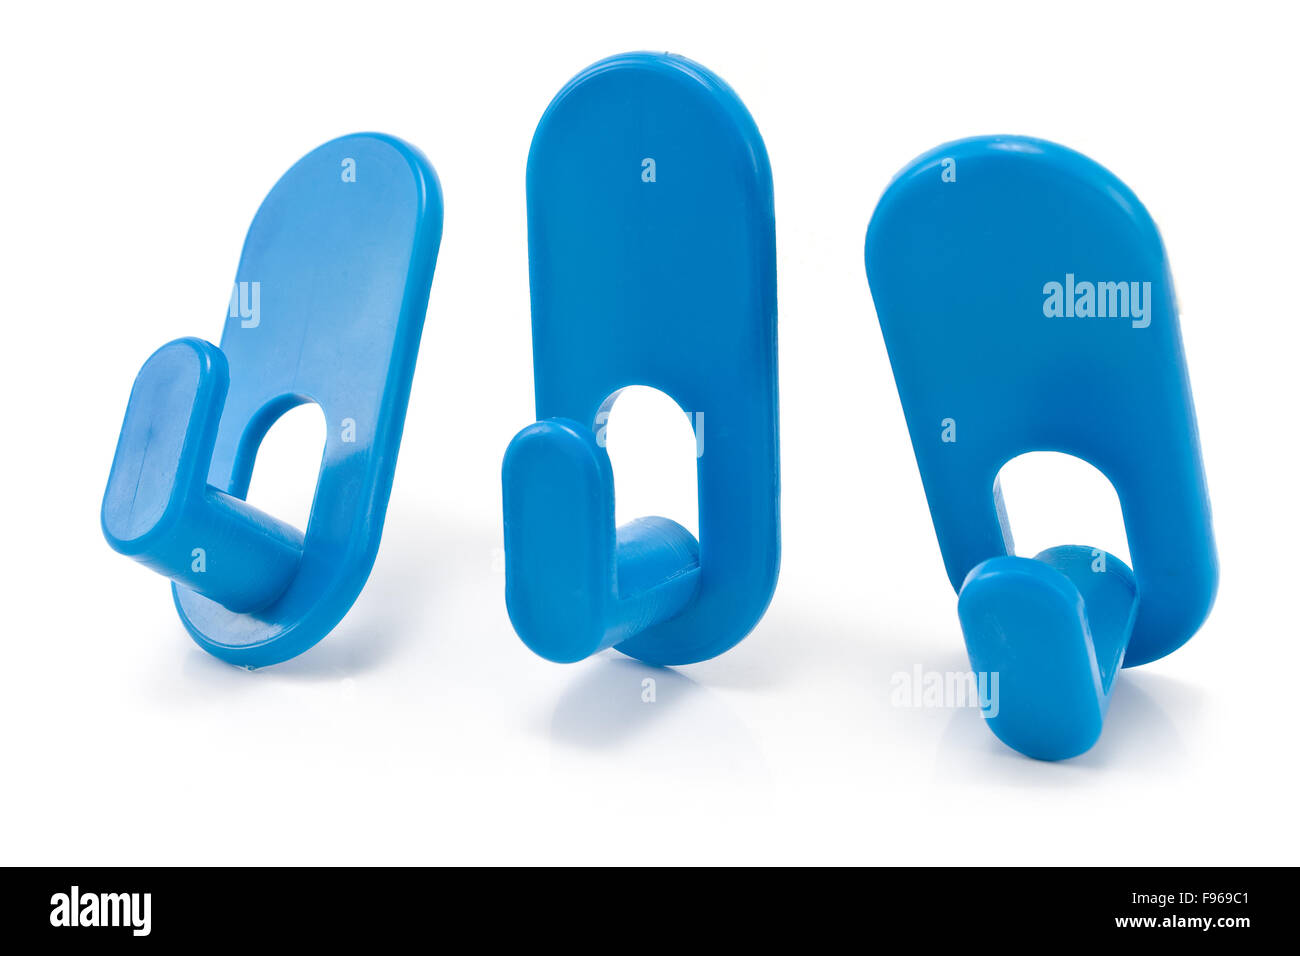 Three blue plastic wall hook hangers isolated on white Stock Photo